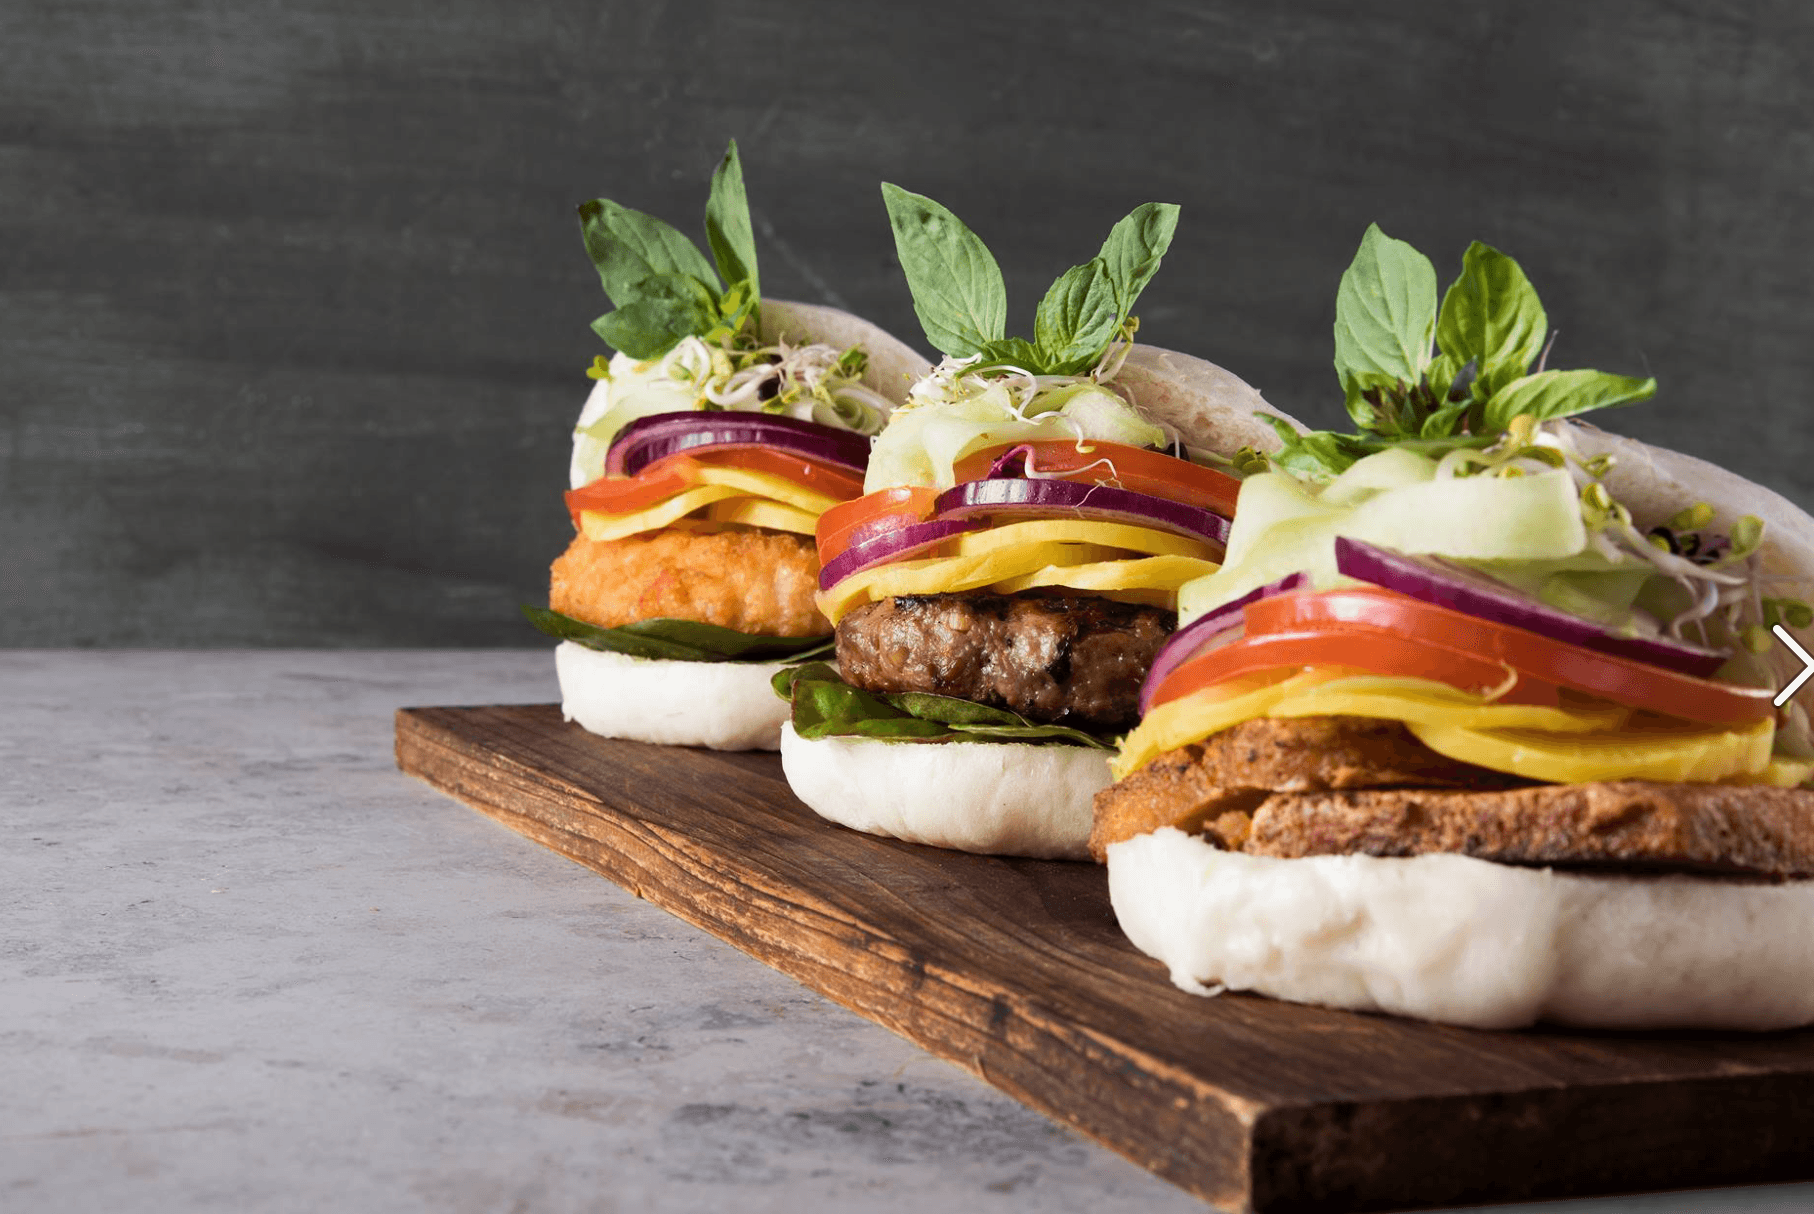 Cover image of this place Bun Bao - Finest Asian Burgers